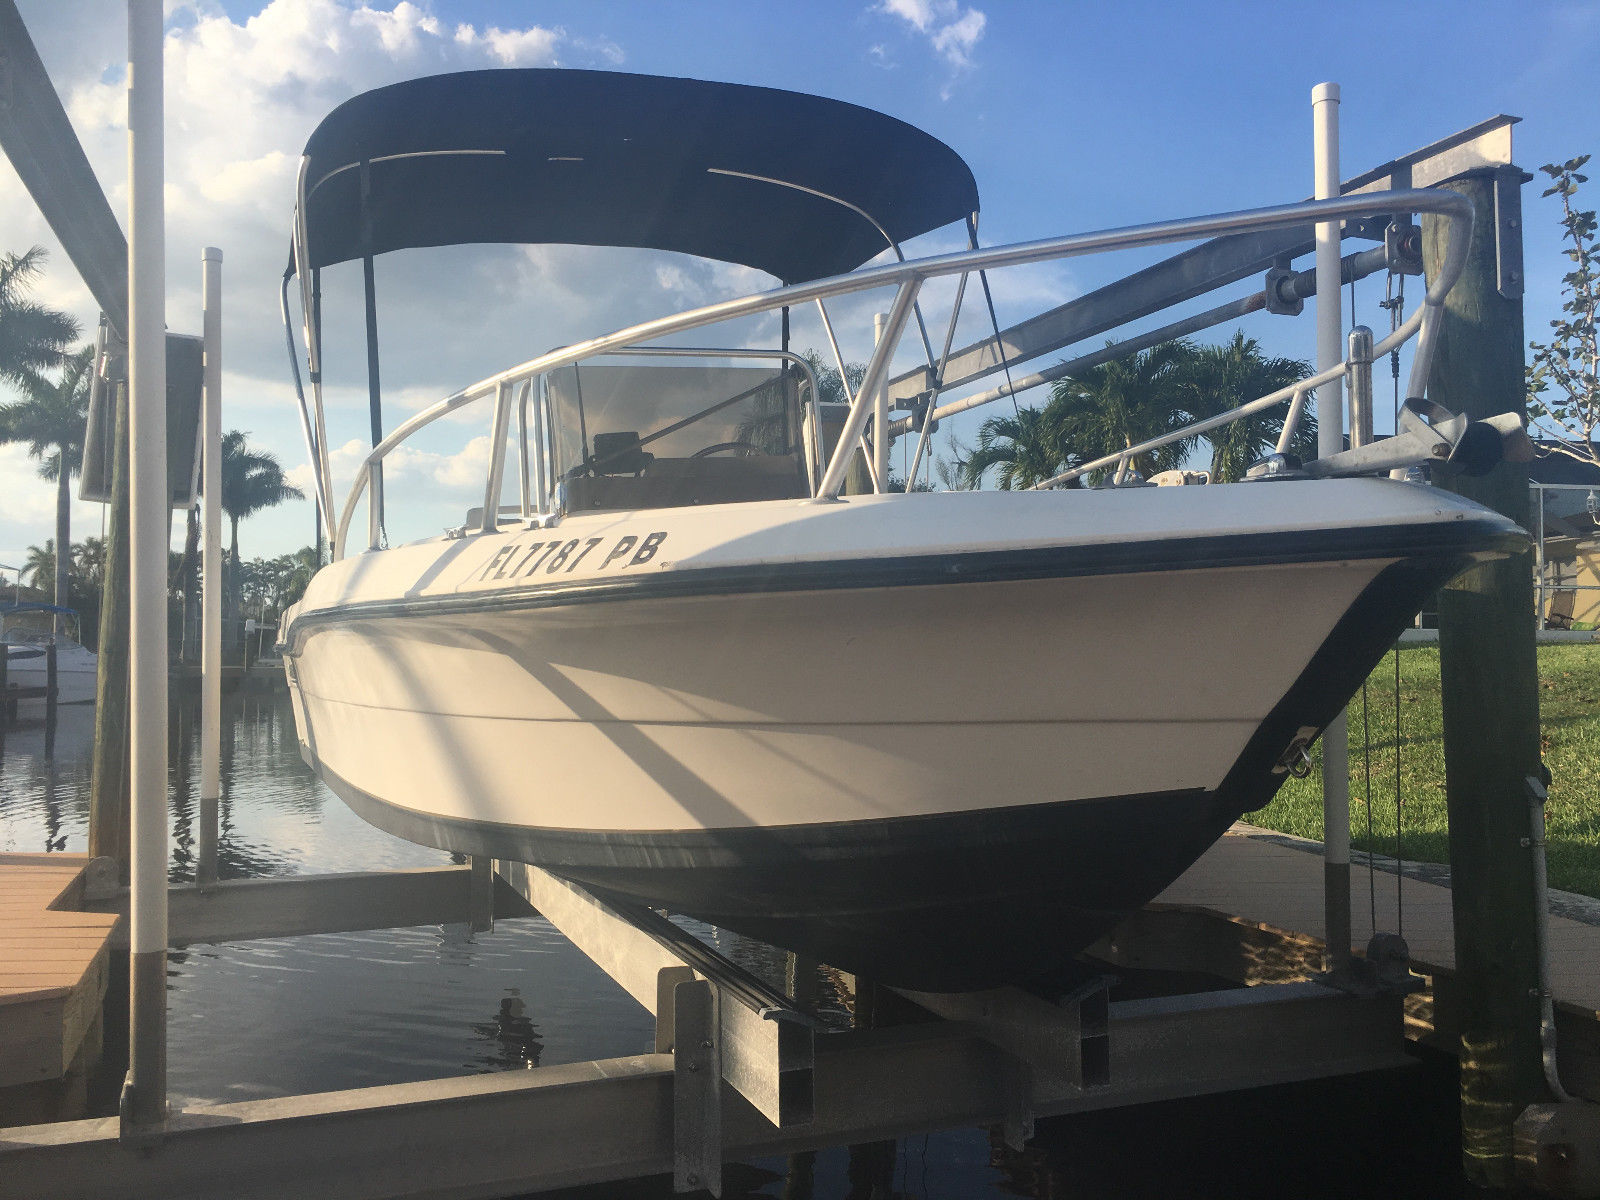 Angler Boat 180 2001 for sale for $9,850 - Boats-from-USA.com